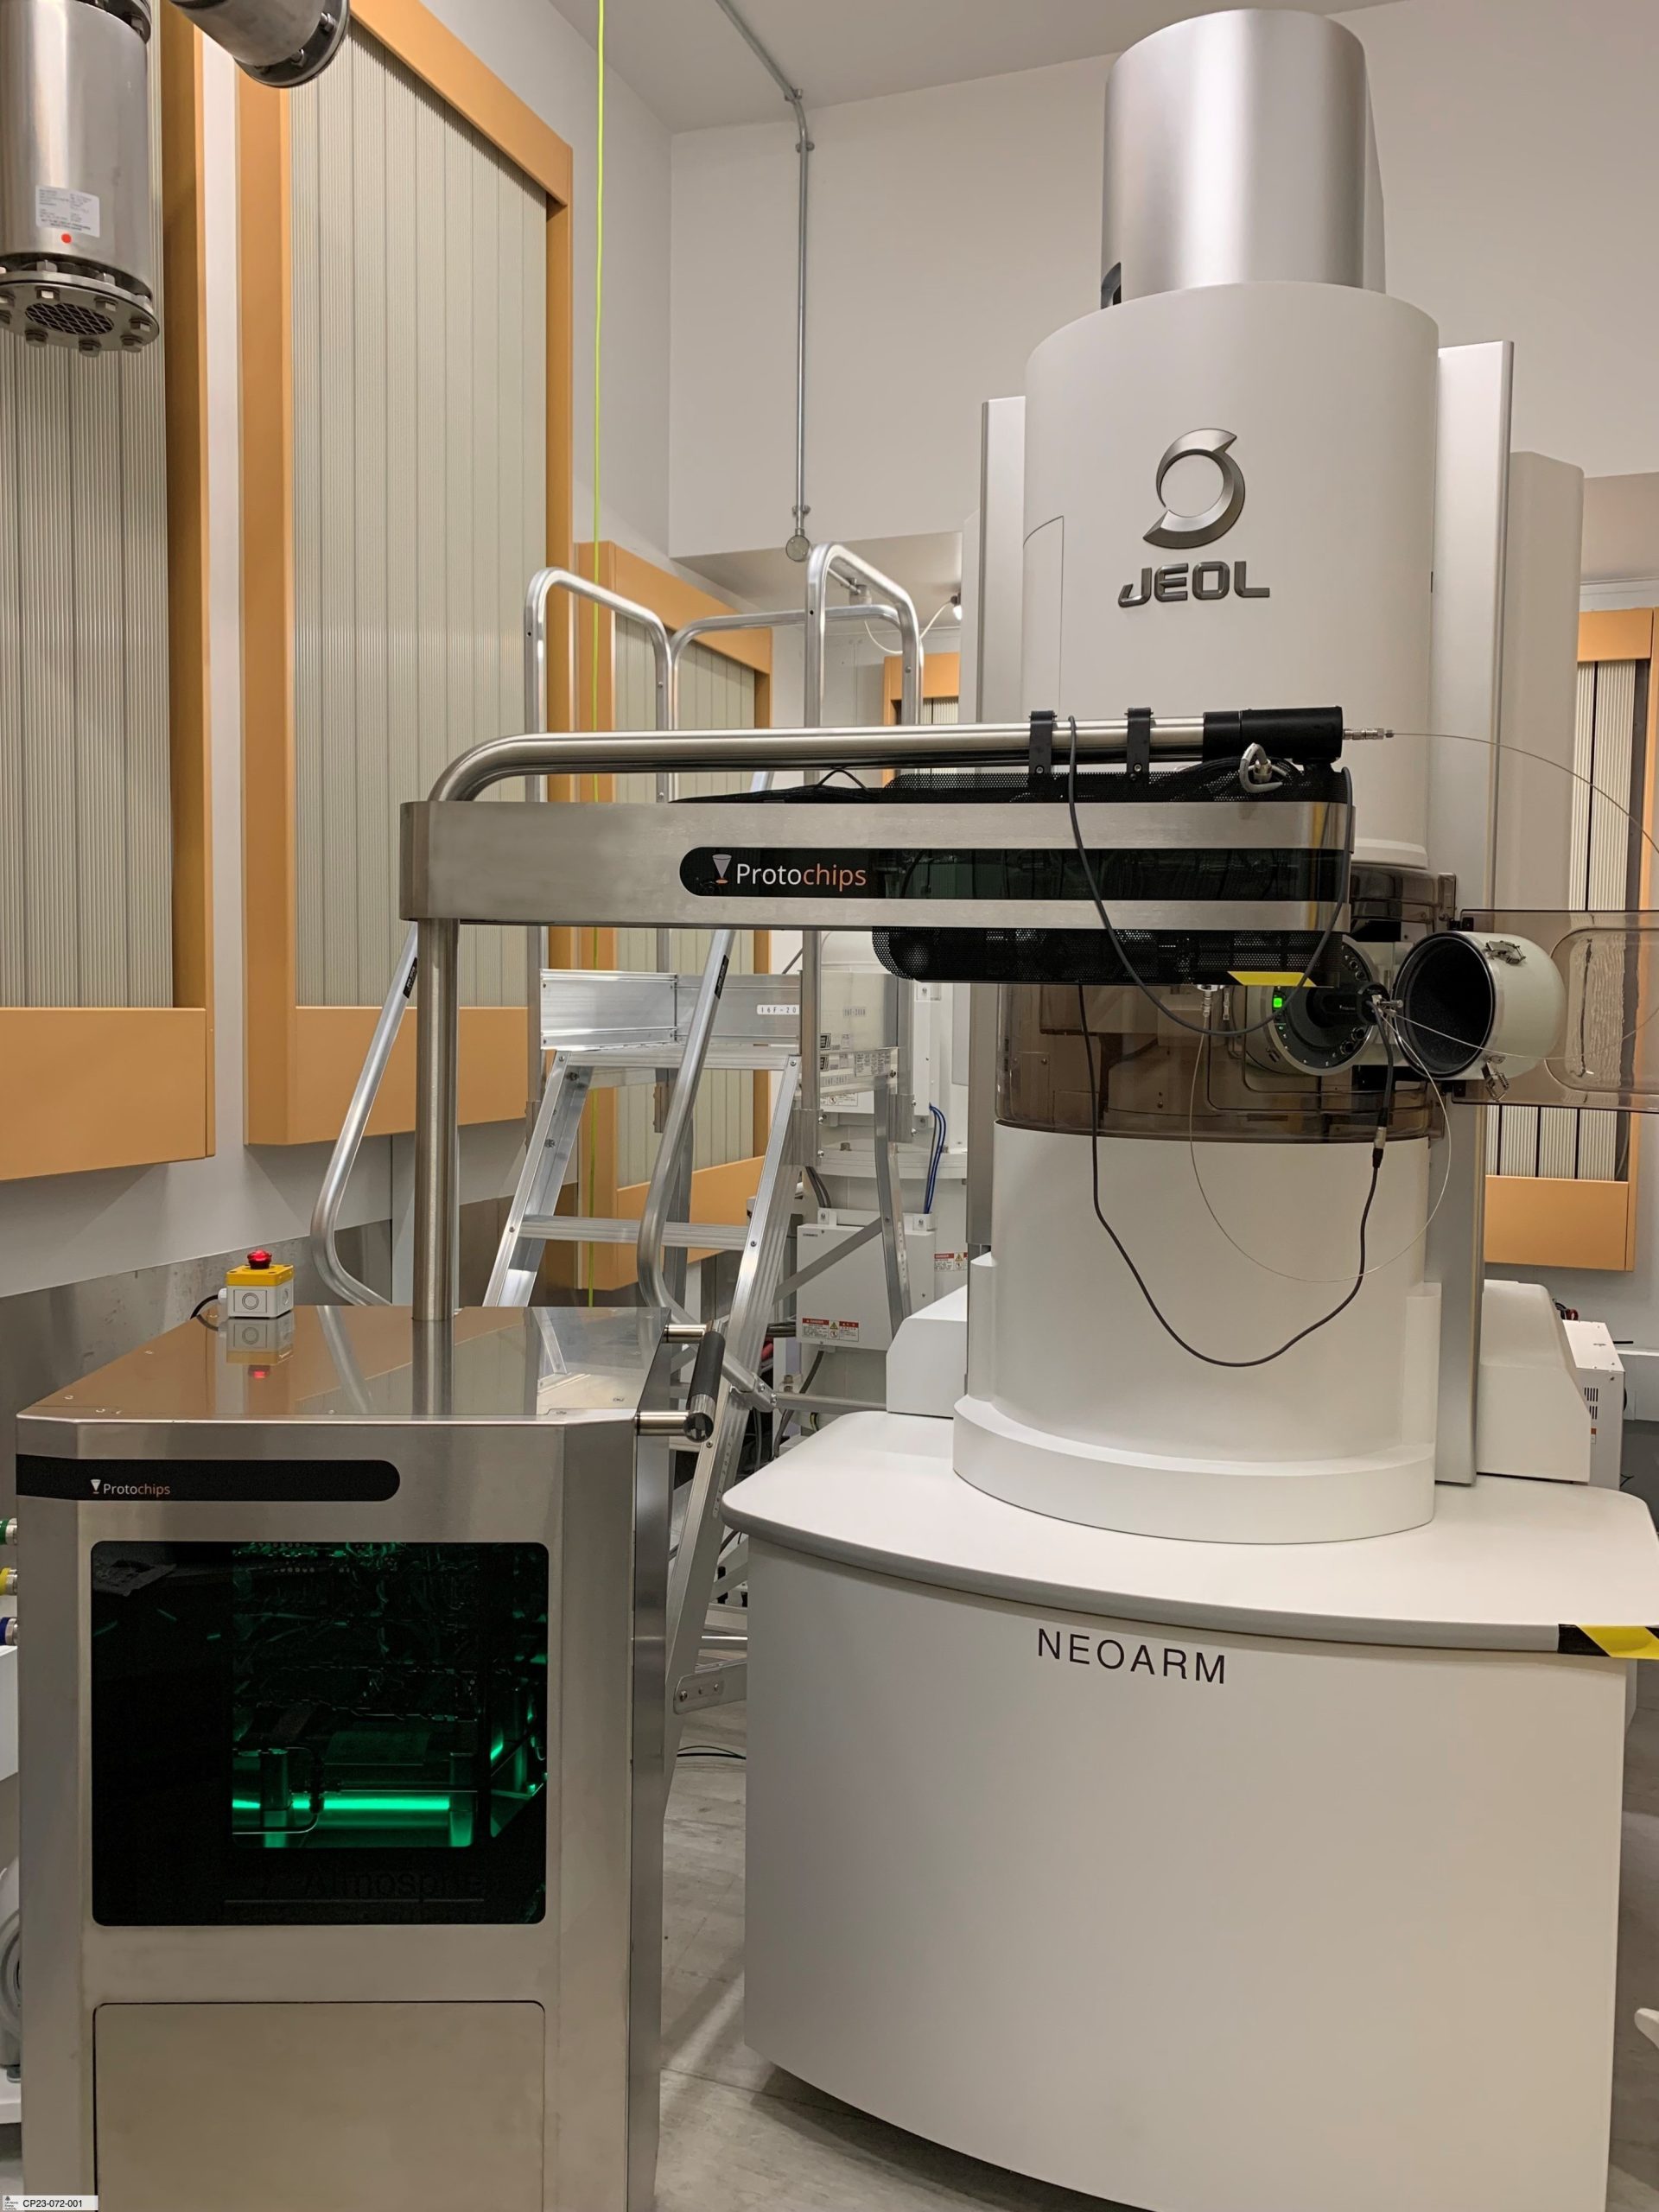 Protochips – Atmosphere Gas Cell System coupled with the JEOL NEOARM 